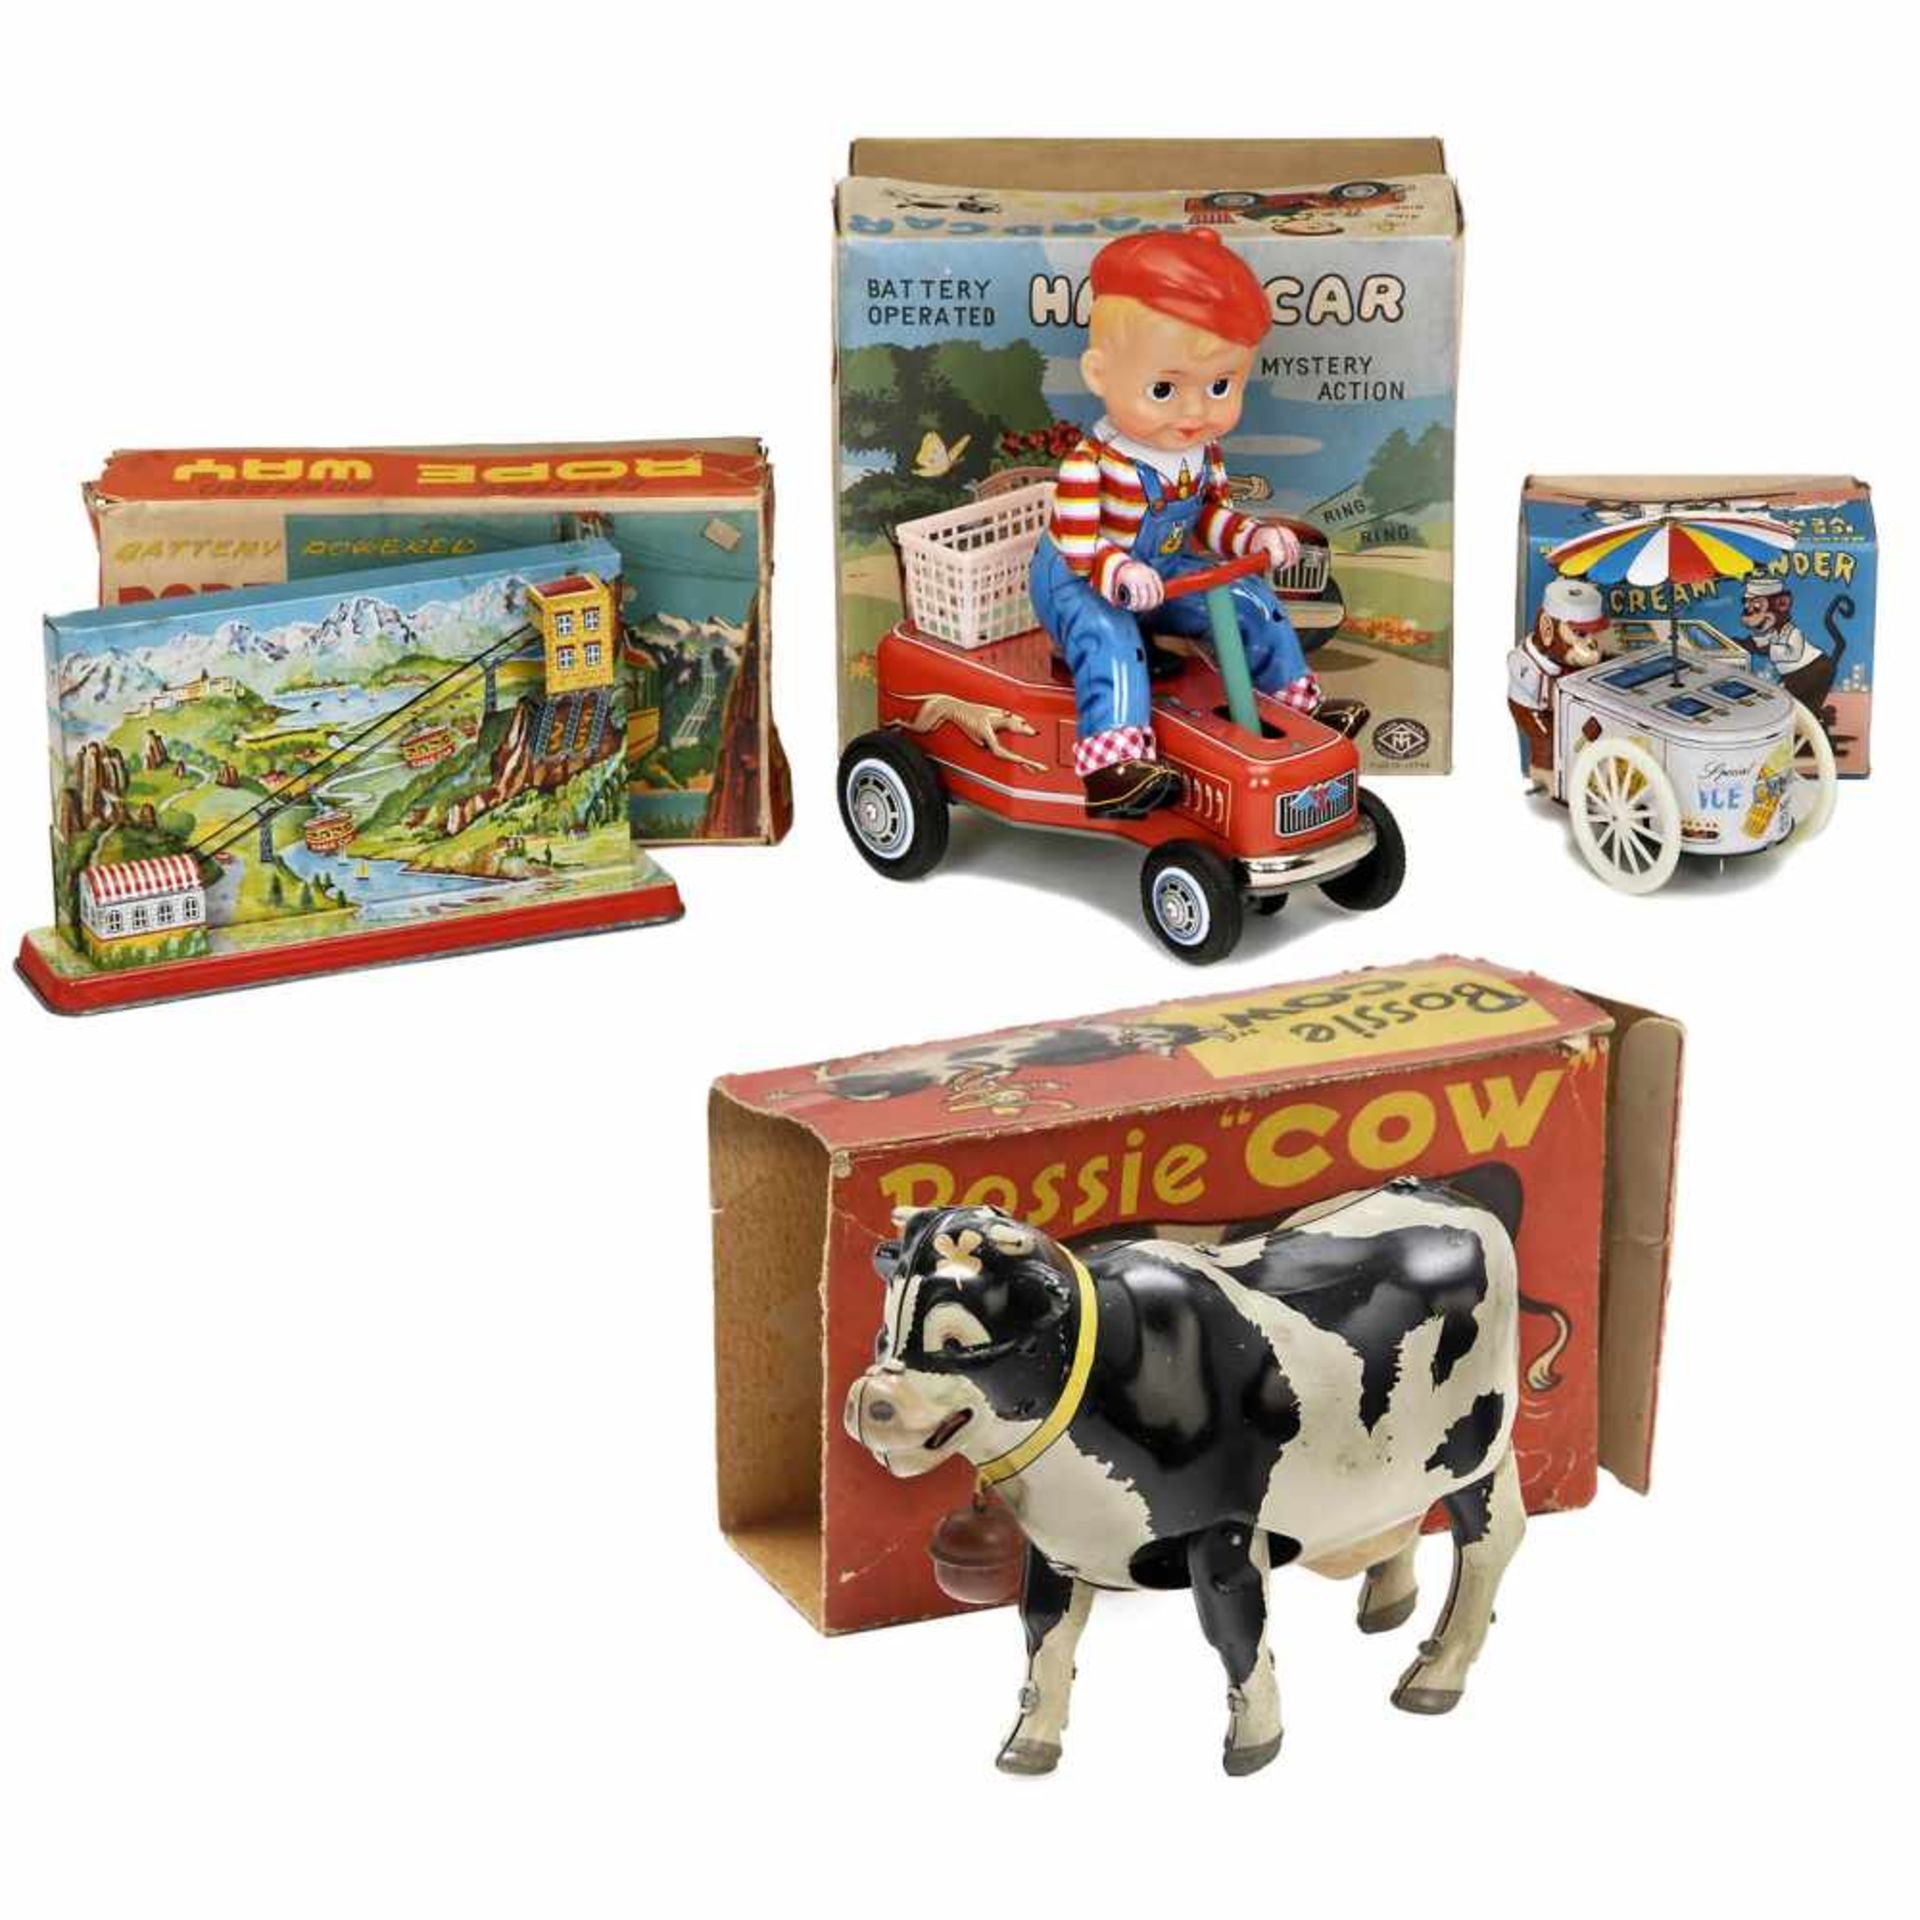 4 Japanese Tin Toys1) Bossie "Cow" toy by Alps, c. 1955. Patent no. 373980, lithographed tin,